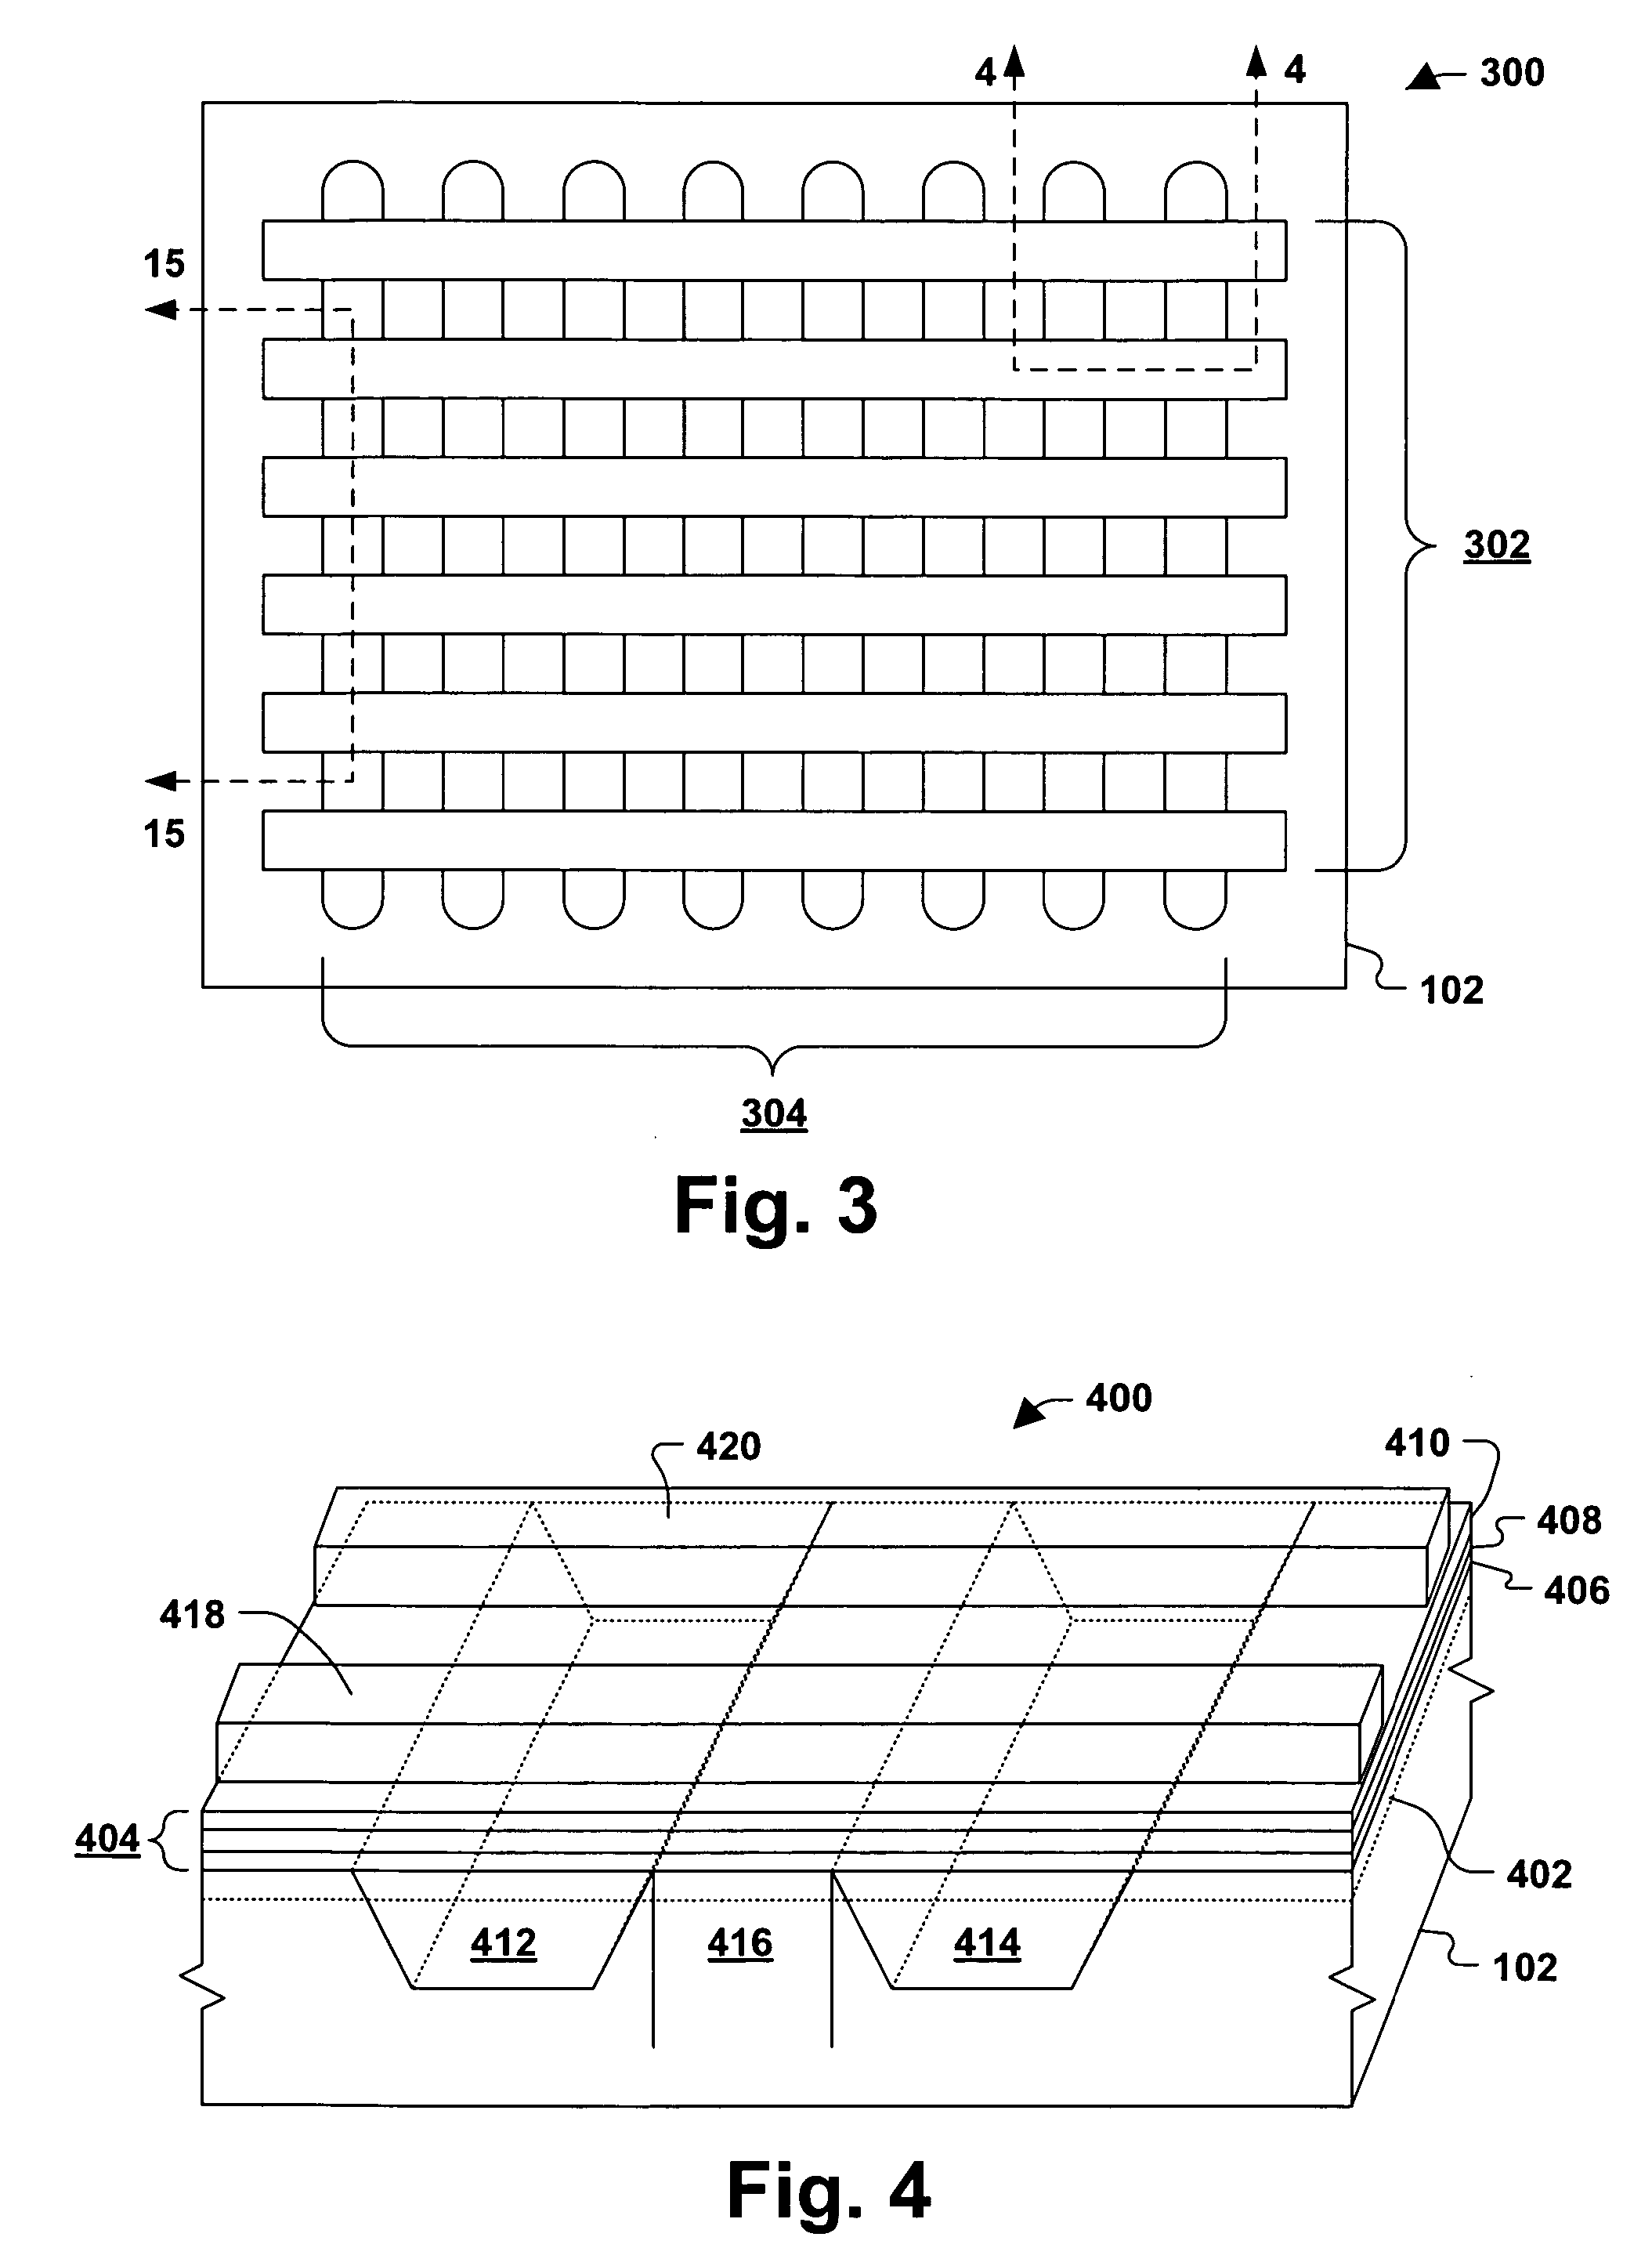 Method of determining voltage compensation for flash memory devices